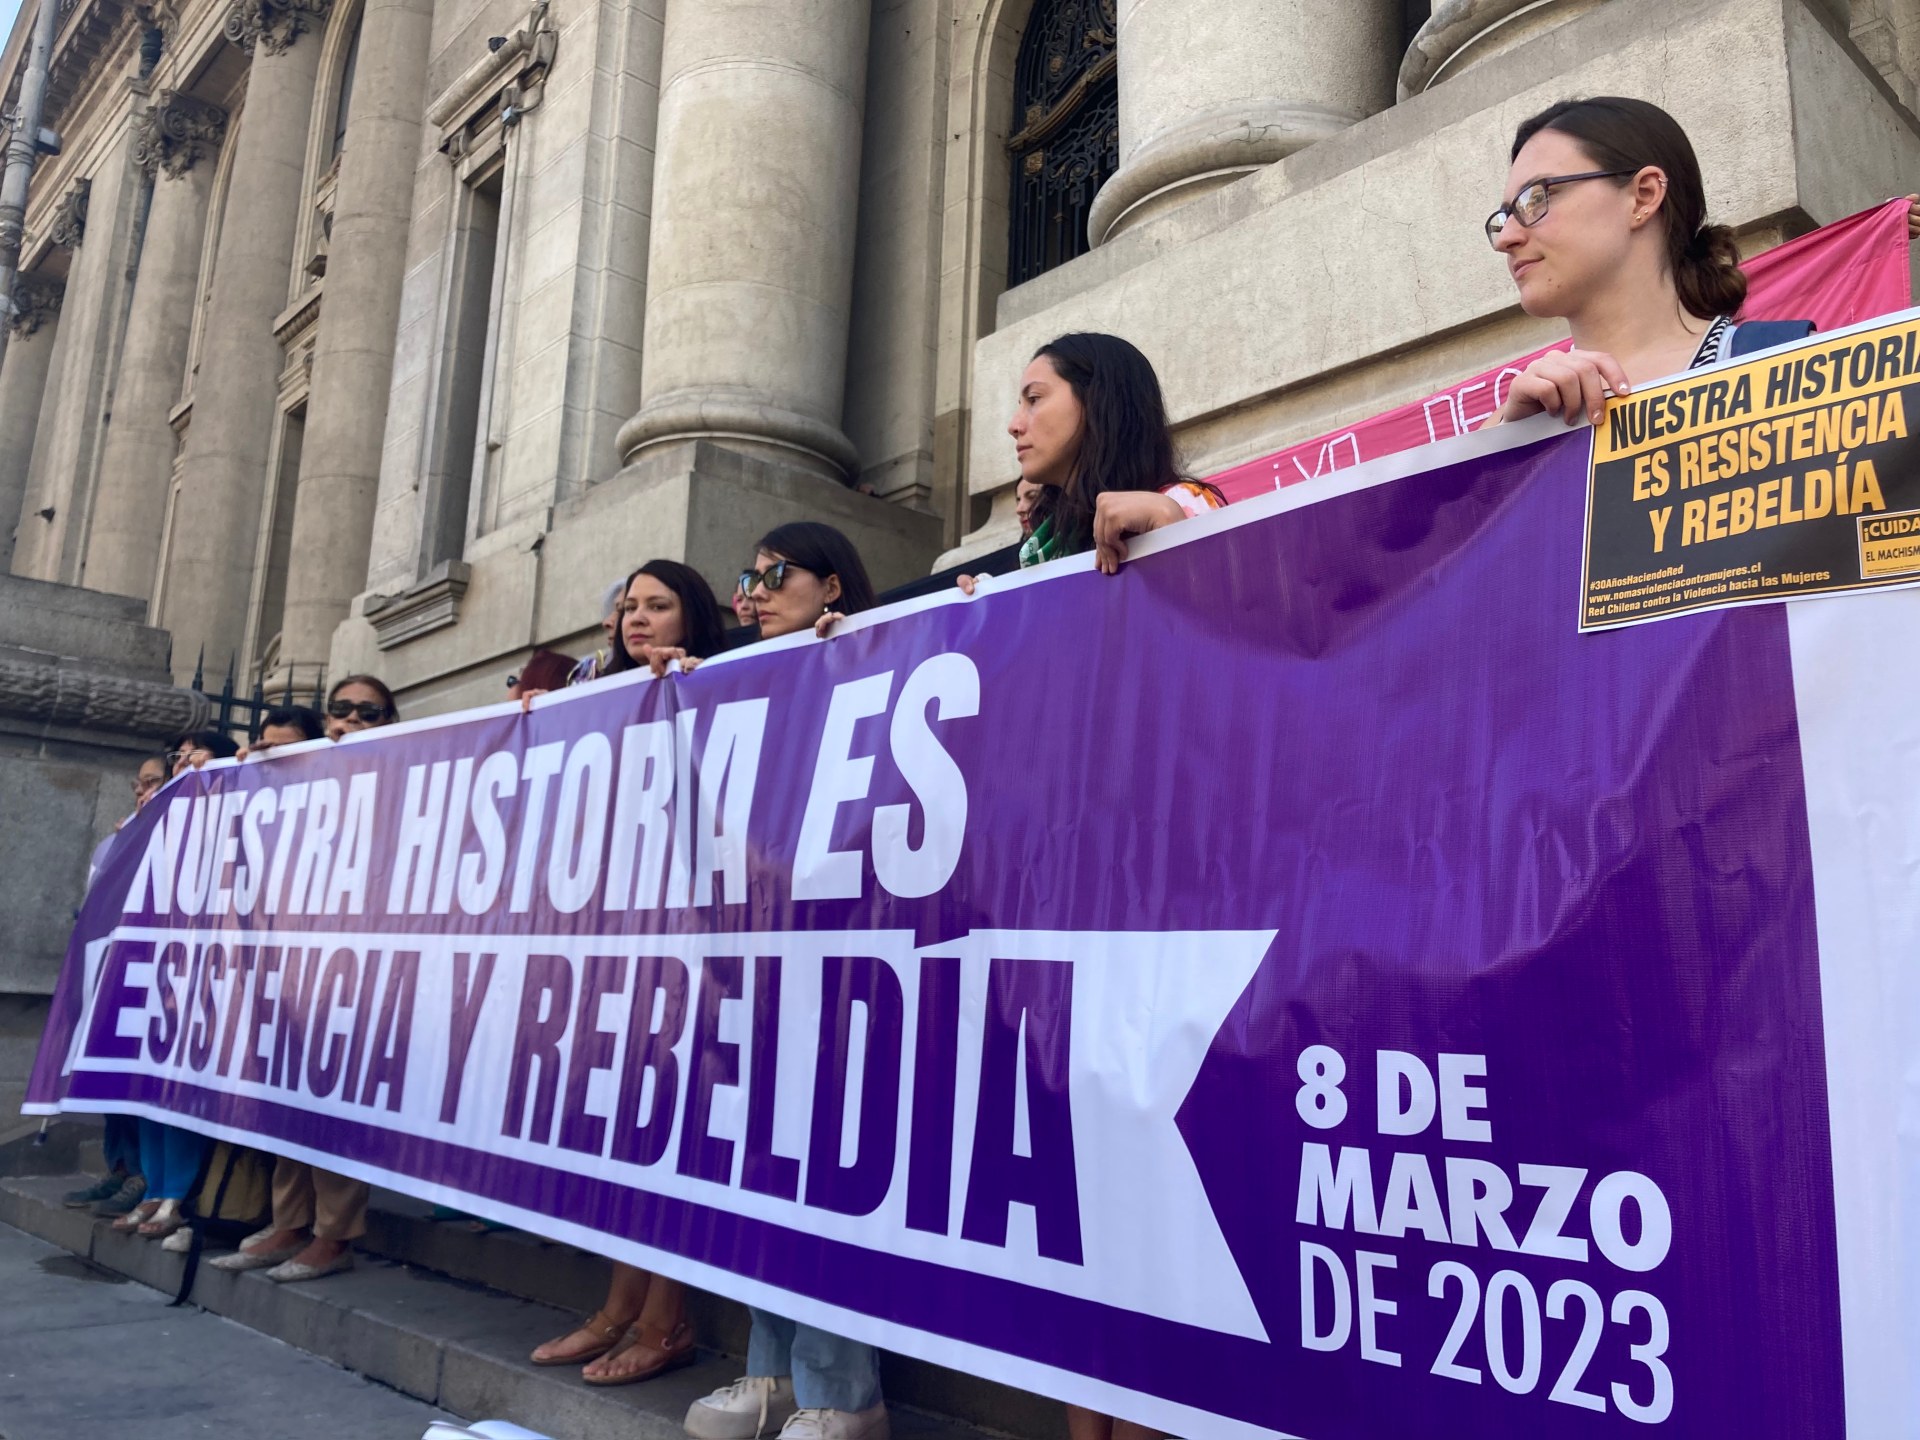 Chile’s abortion rights movement faces uphill battle | Women’s Rights News